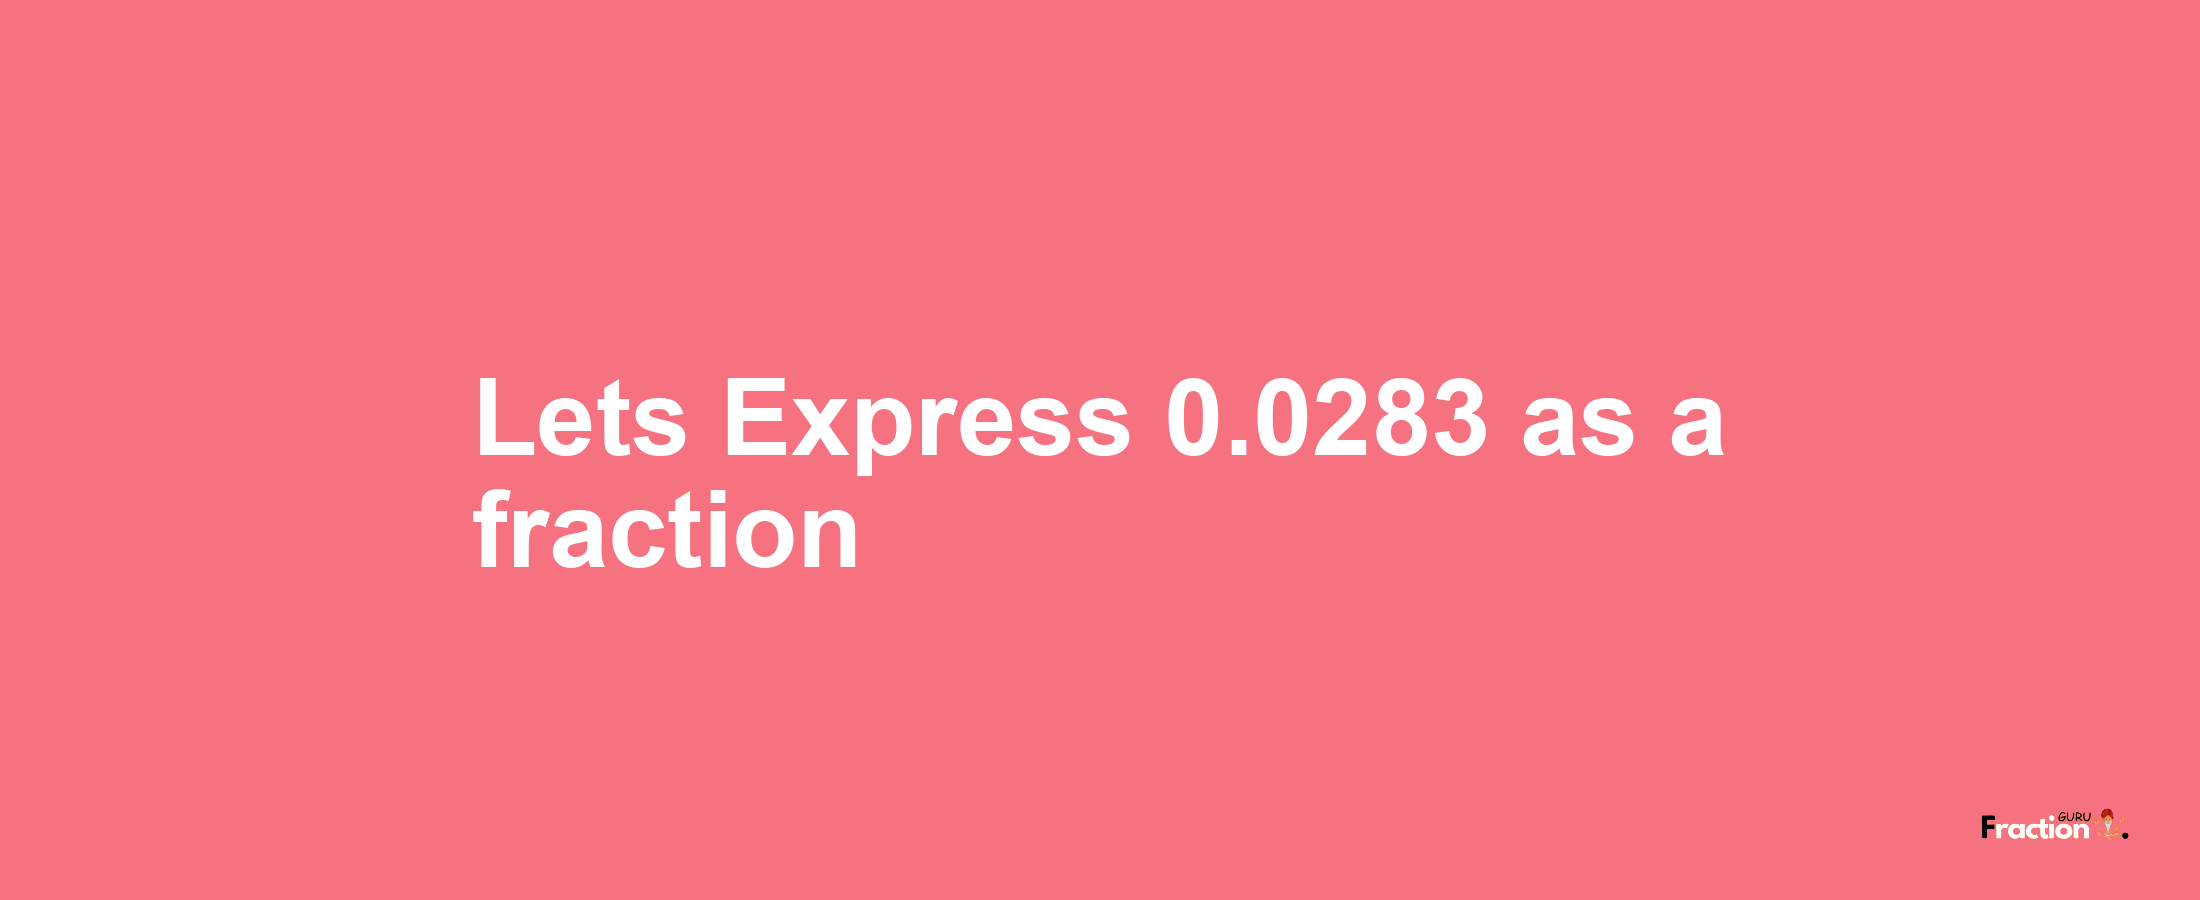 Lets Express 0.0283 as afraction